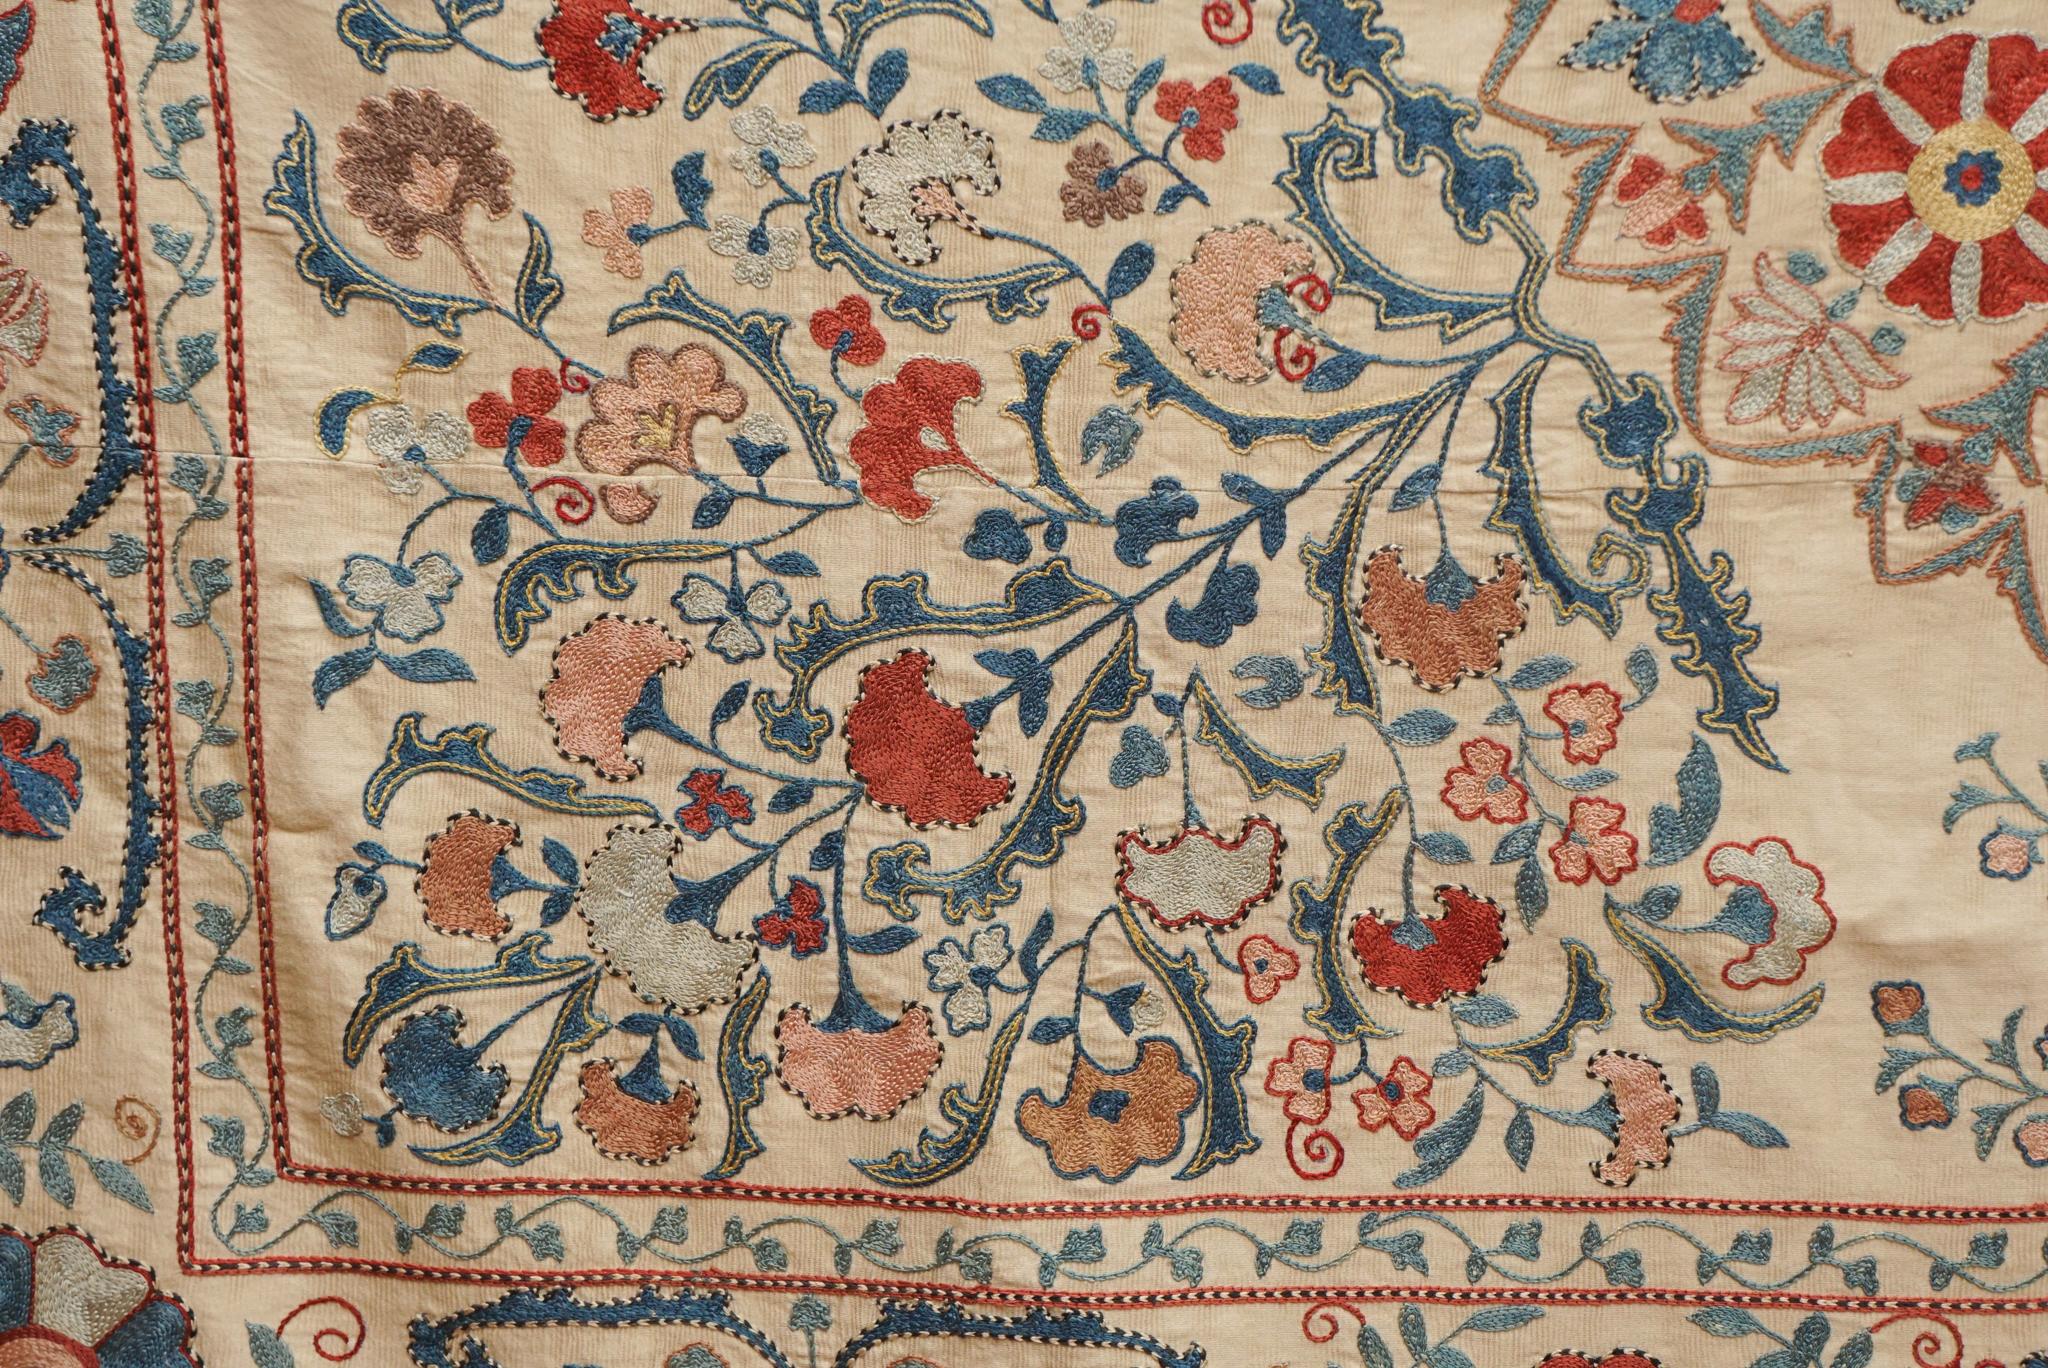 19th Century Antique Suzani Embroidered Textile For Sale